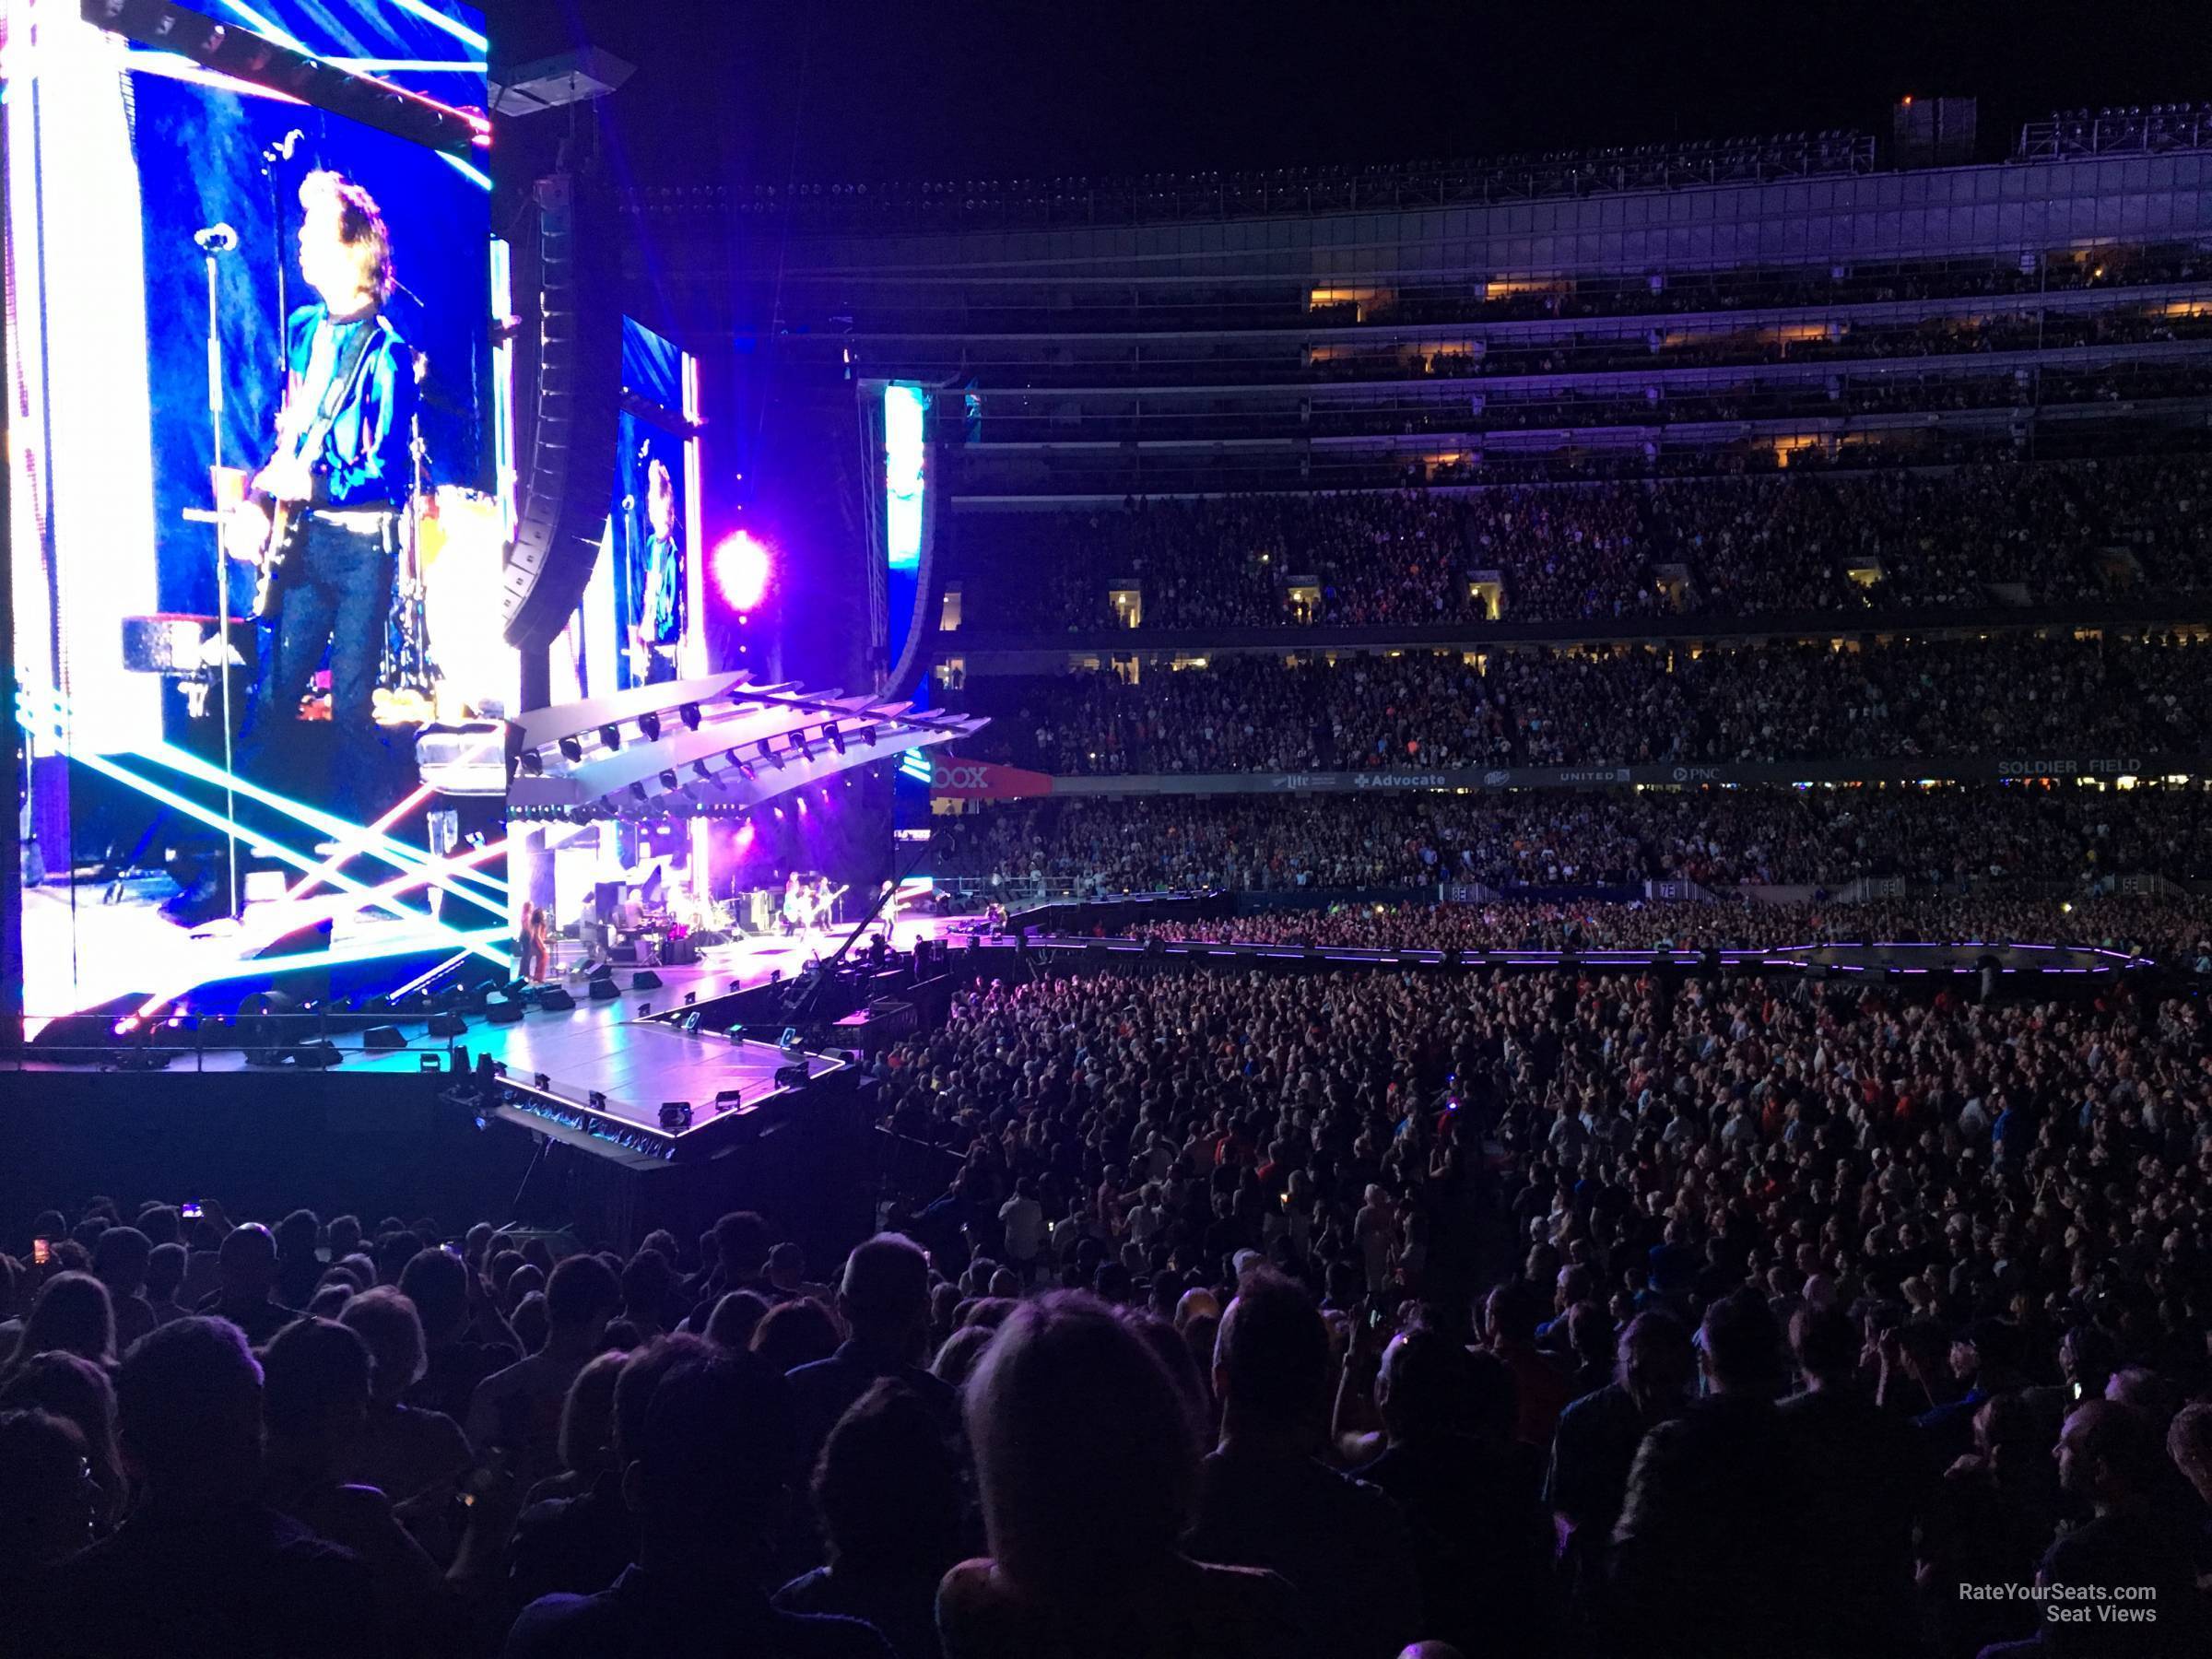 section 141, row 19 seat view  for concert - soldier field